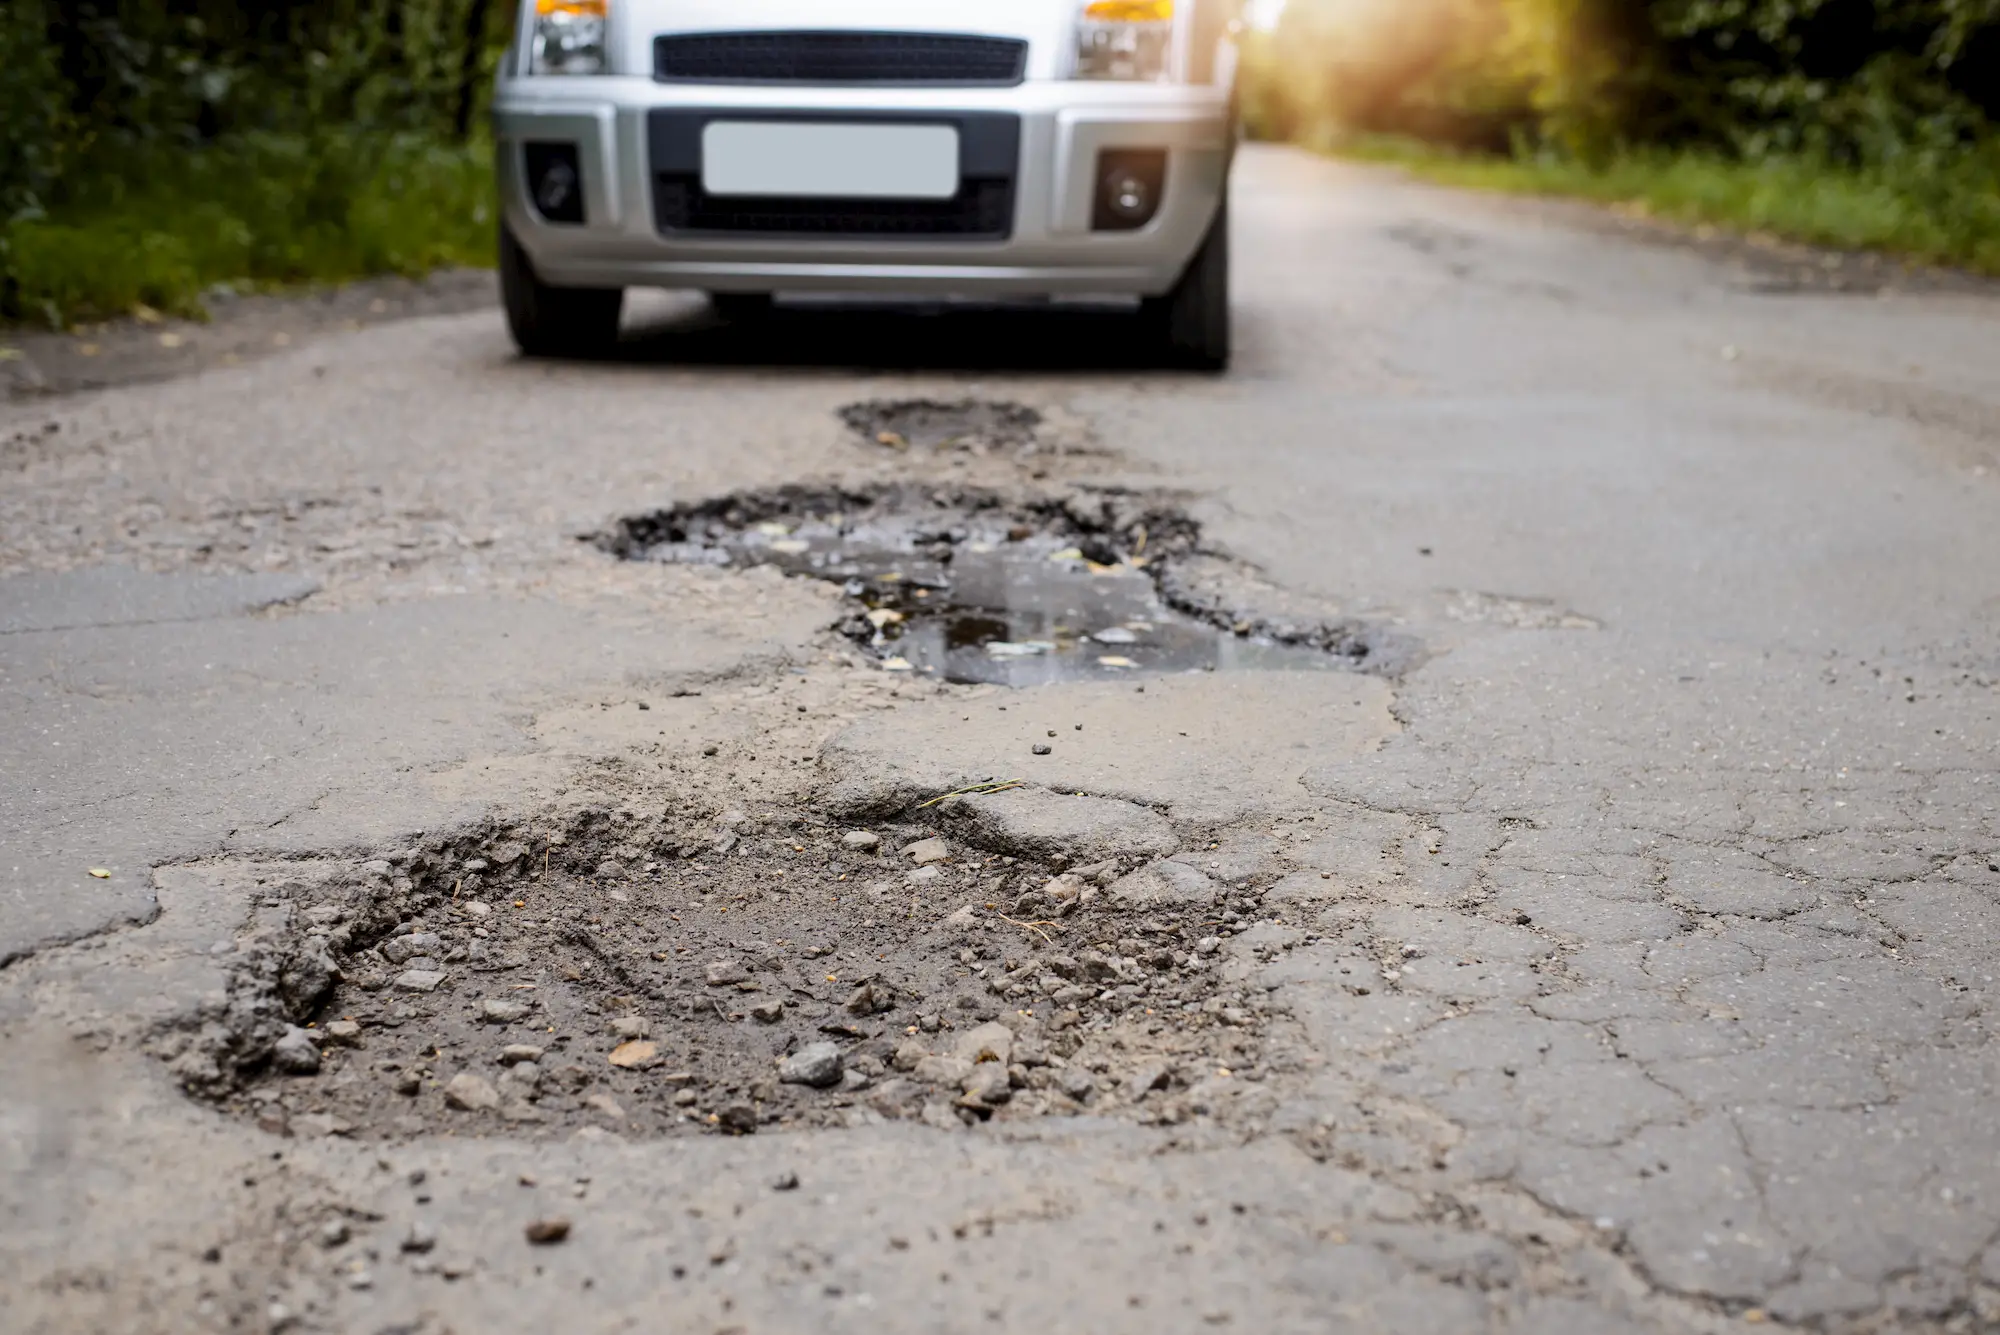 Private road pothole repair company Central England